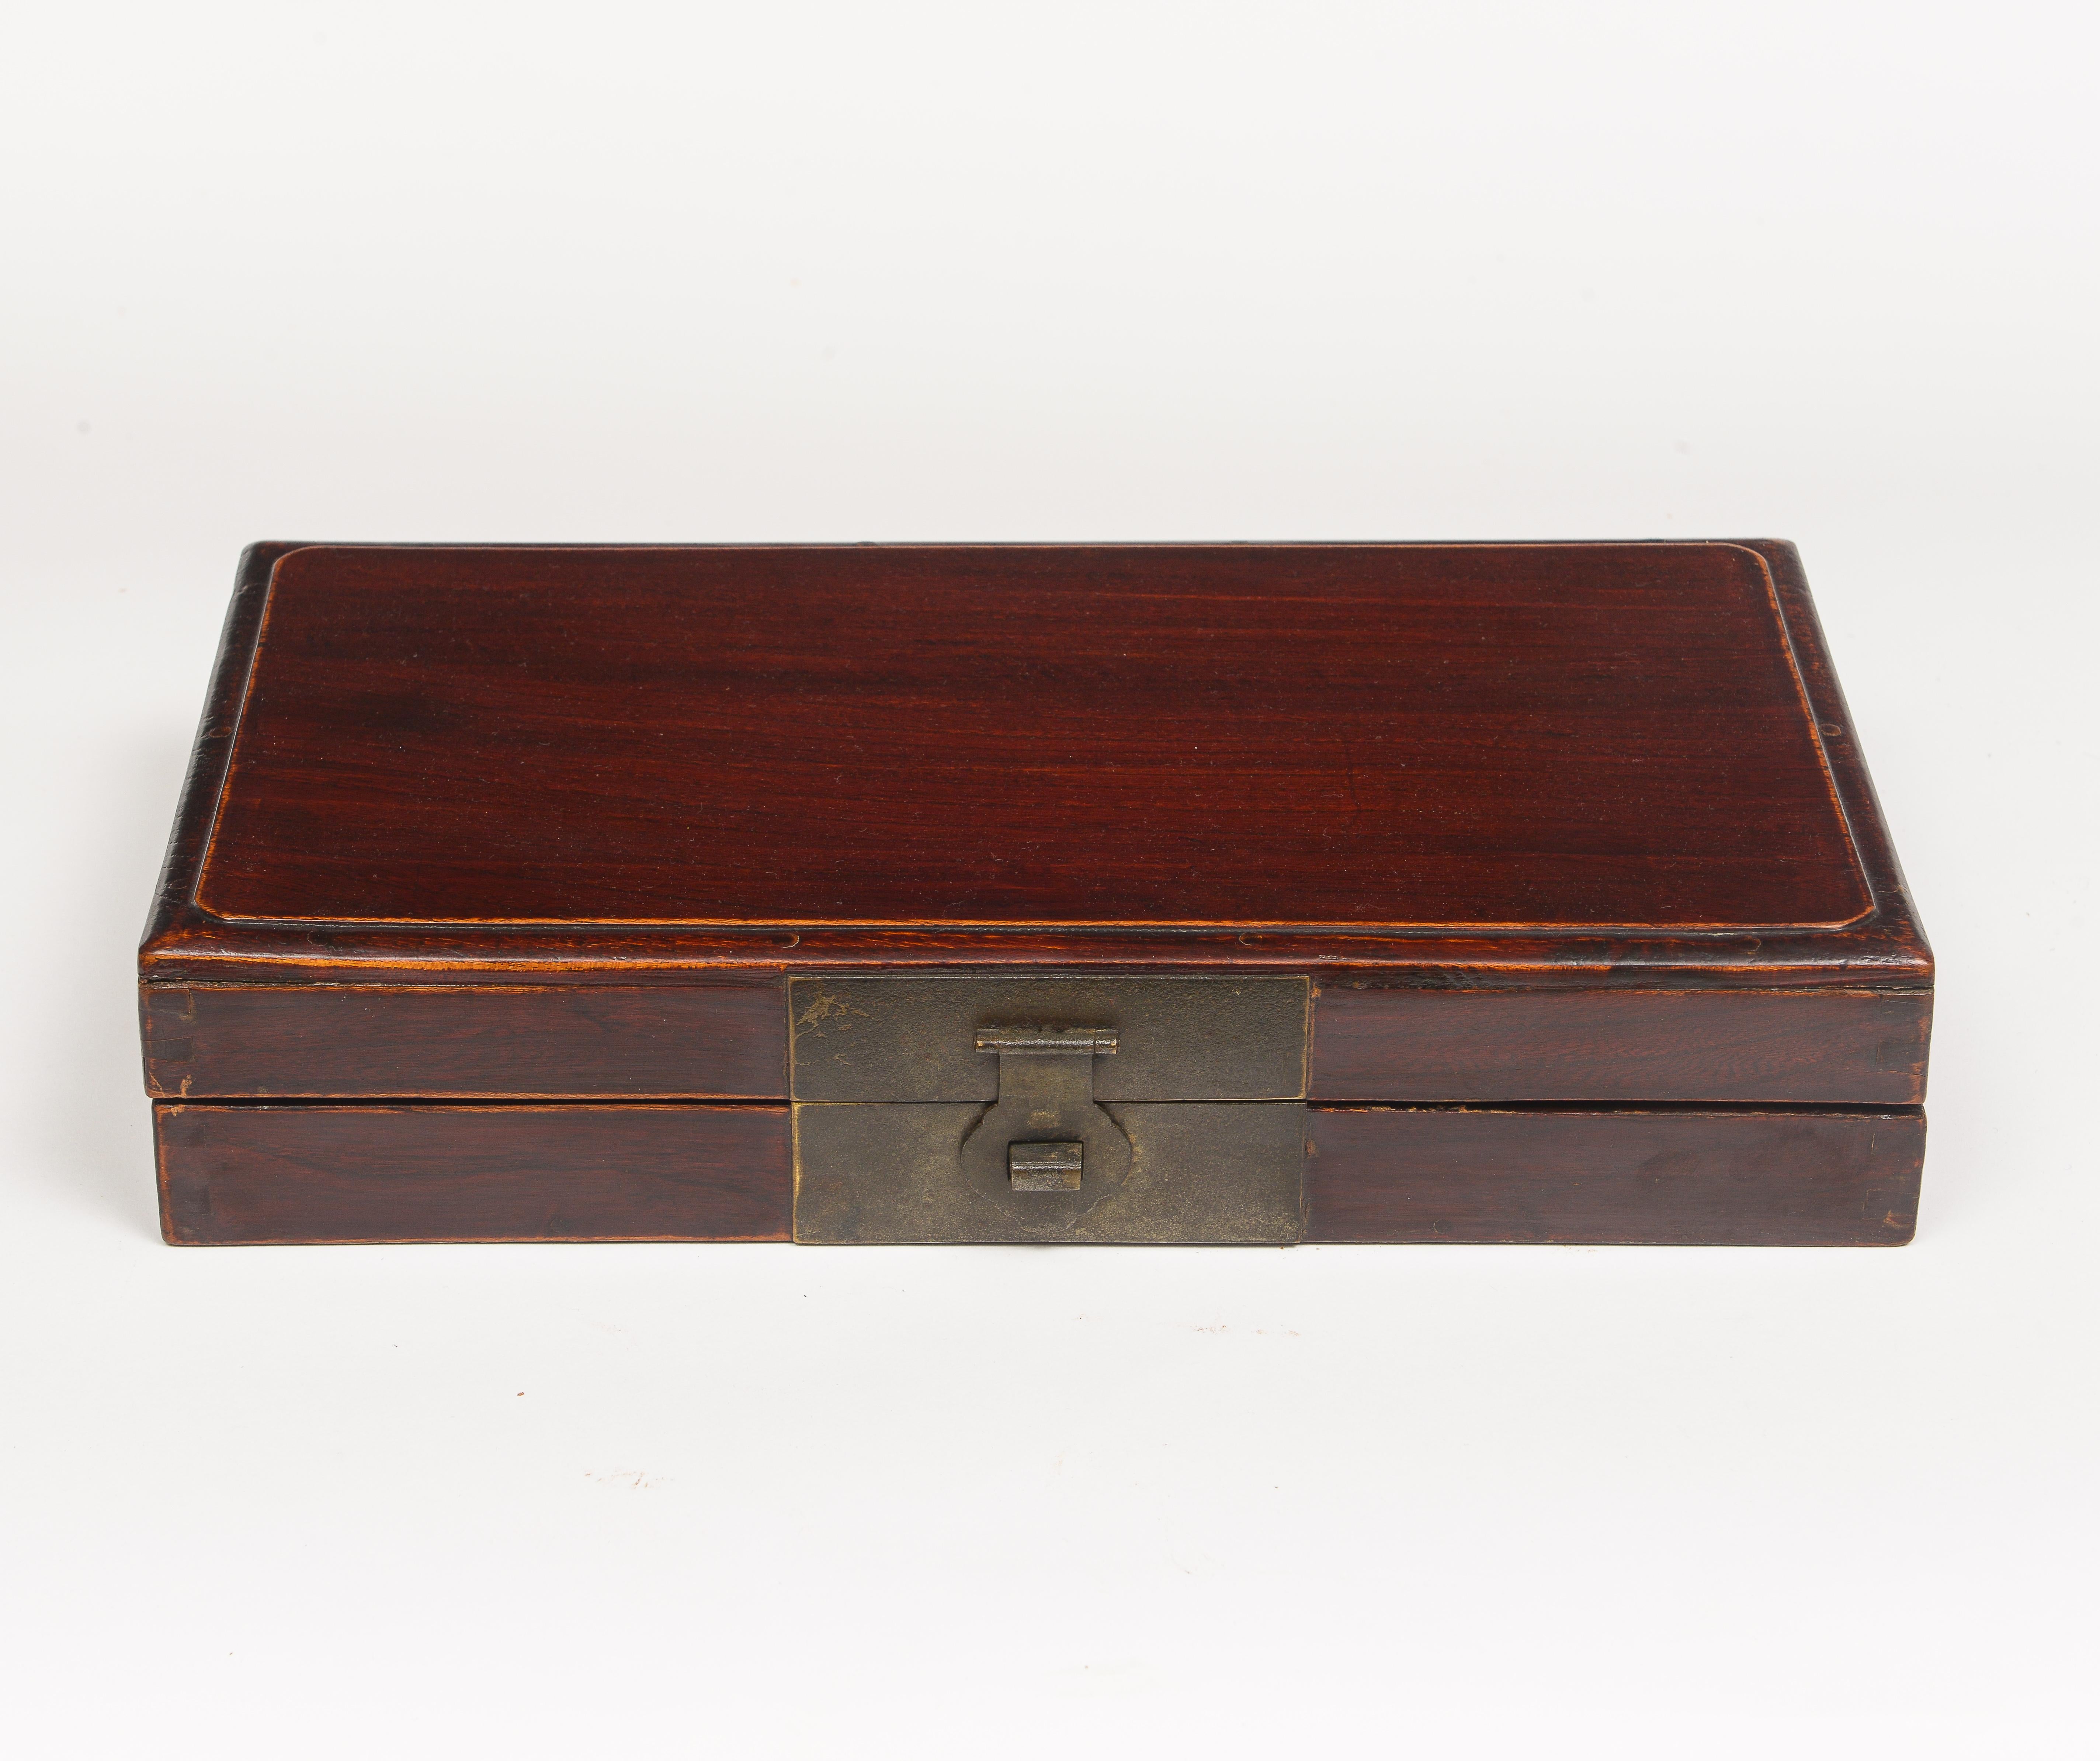 19th Century Red Stained Chinese Flat Box
Made of Jumu wood with brass hardware and decorative red and gold papered interior